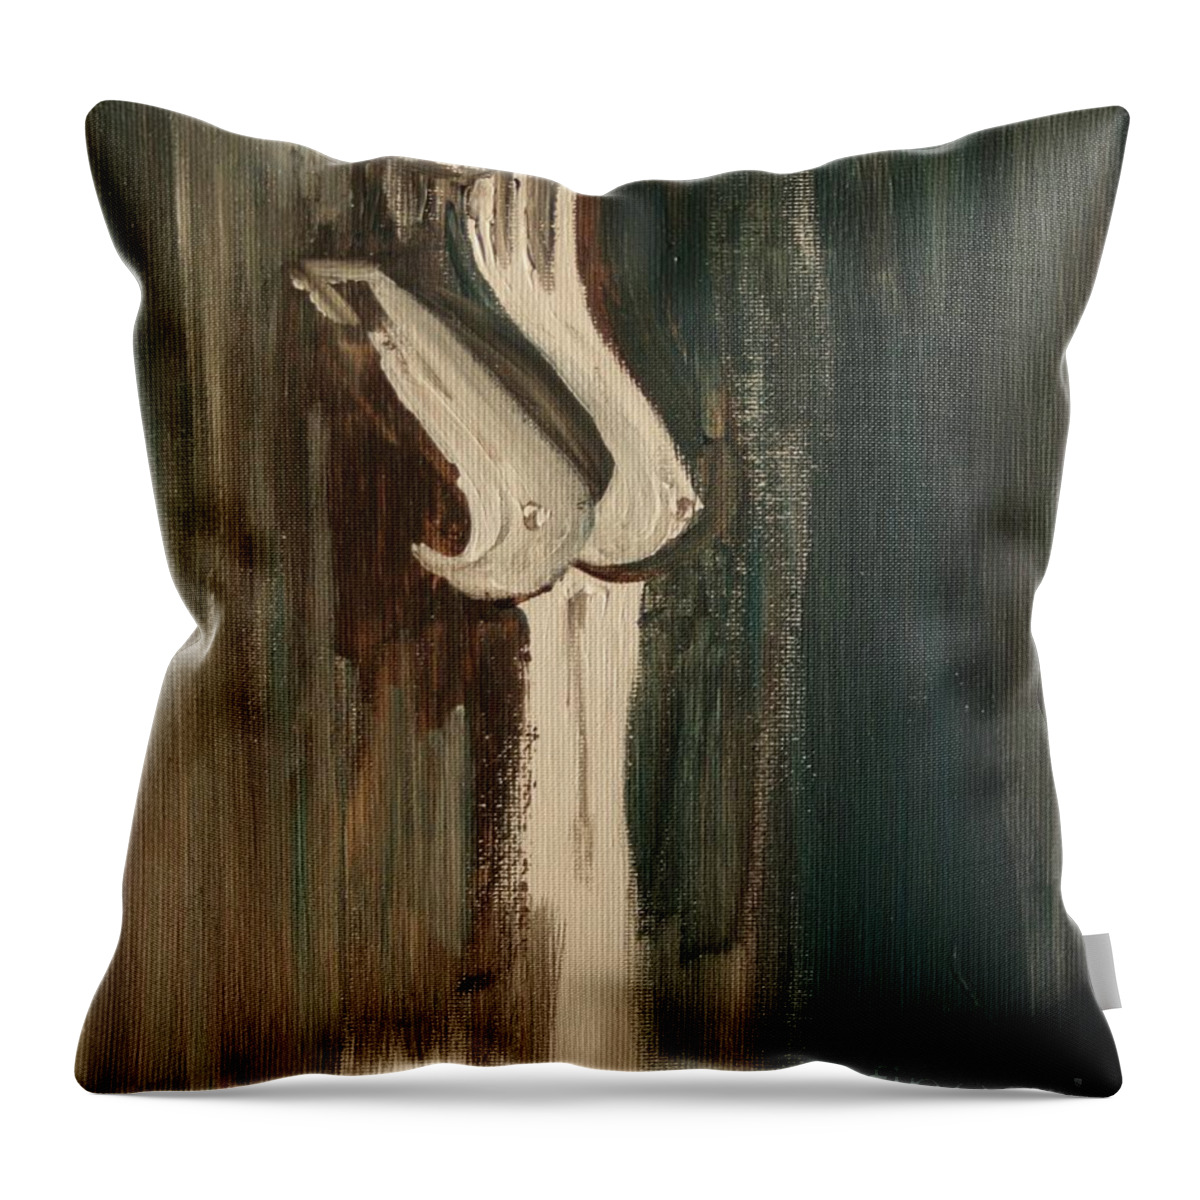 Nude Throw Pillow featuring the painting Silver Silhouette by Julie Lueders 